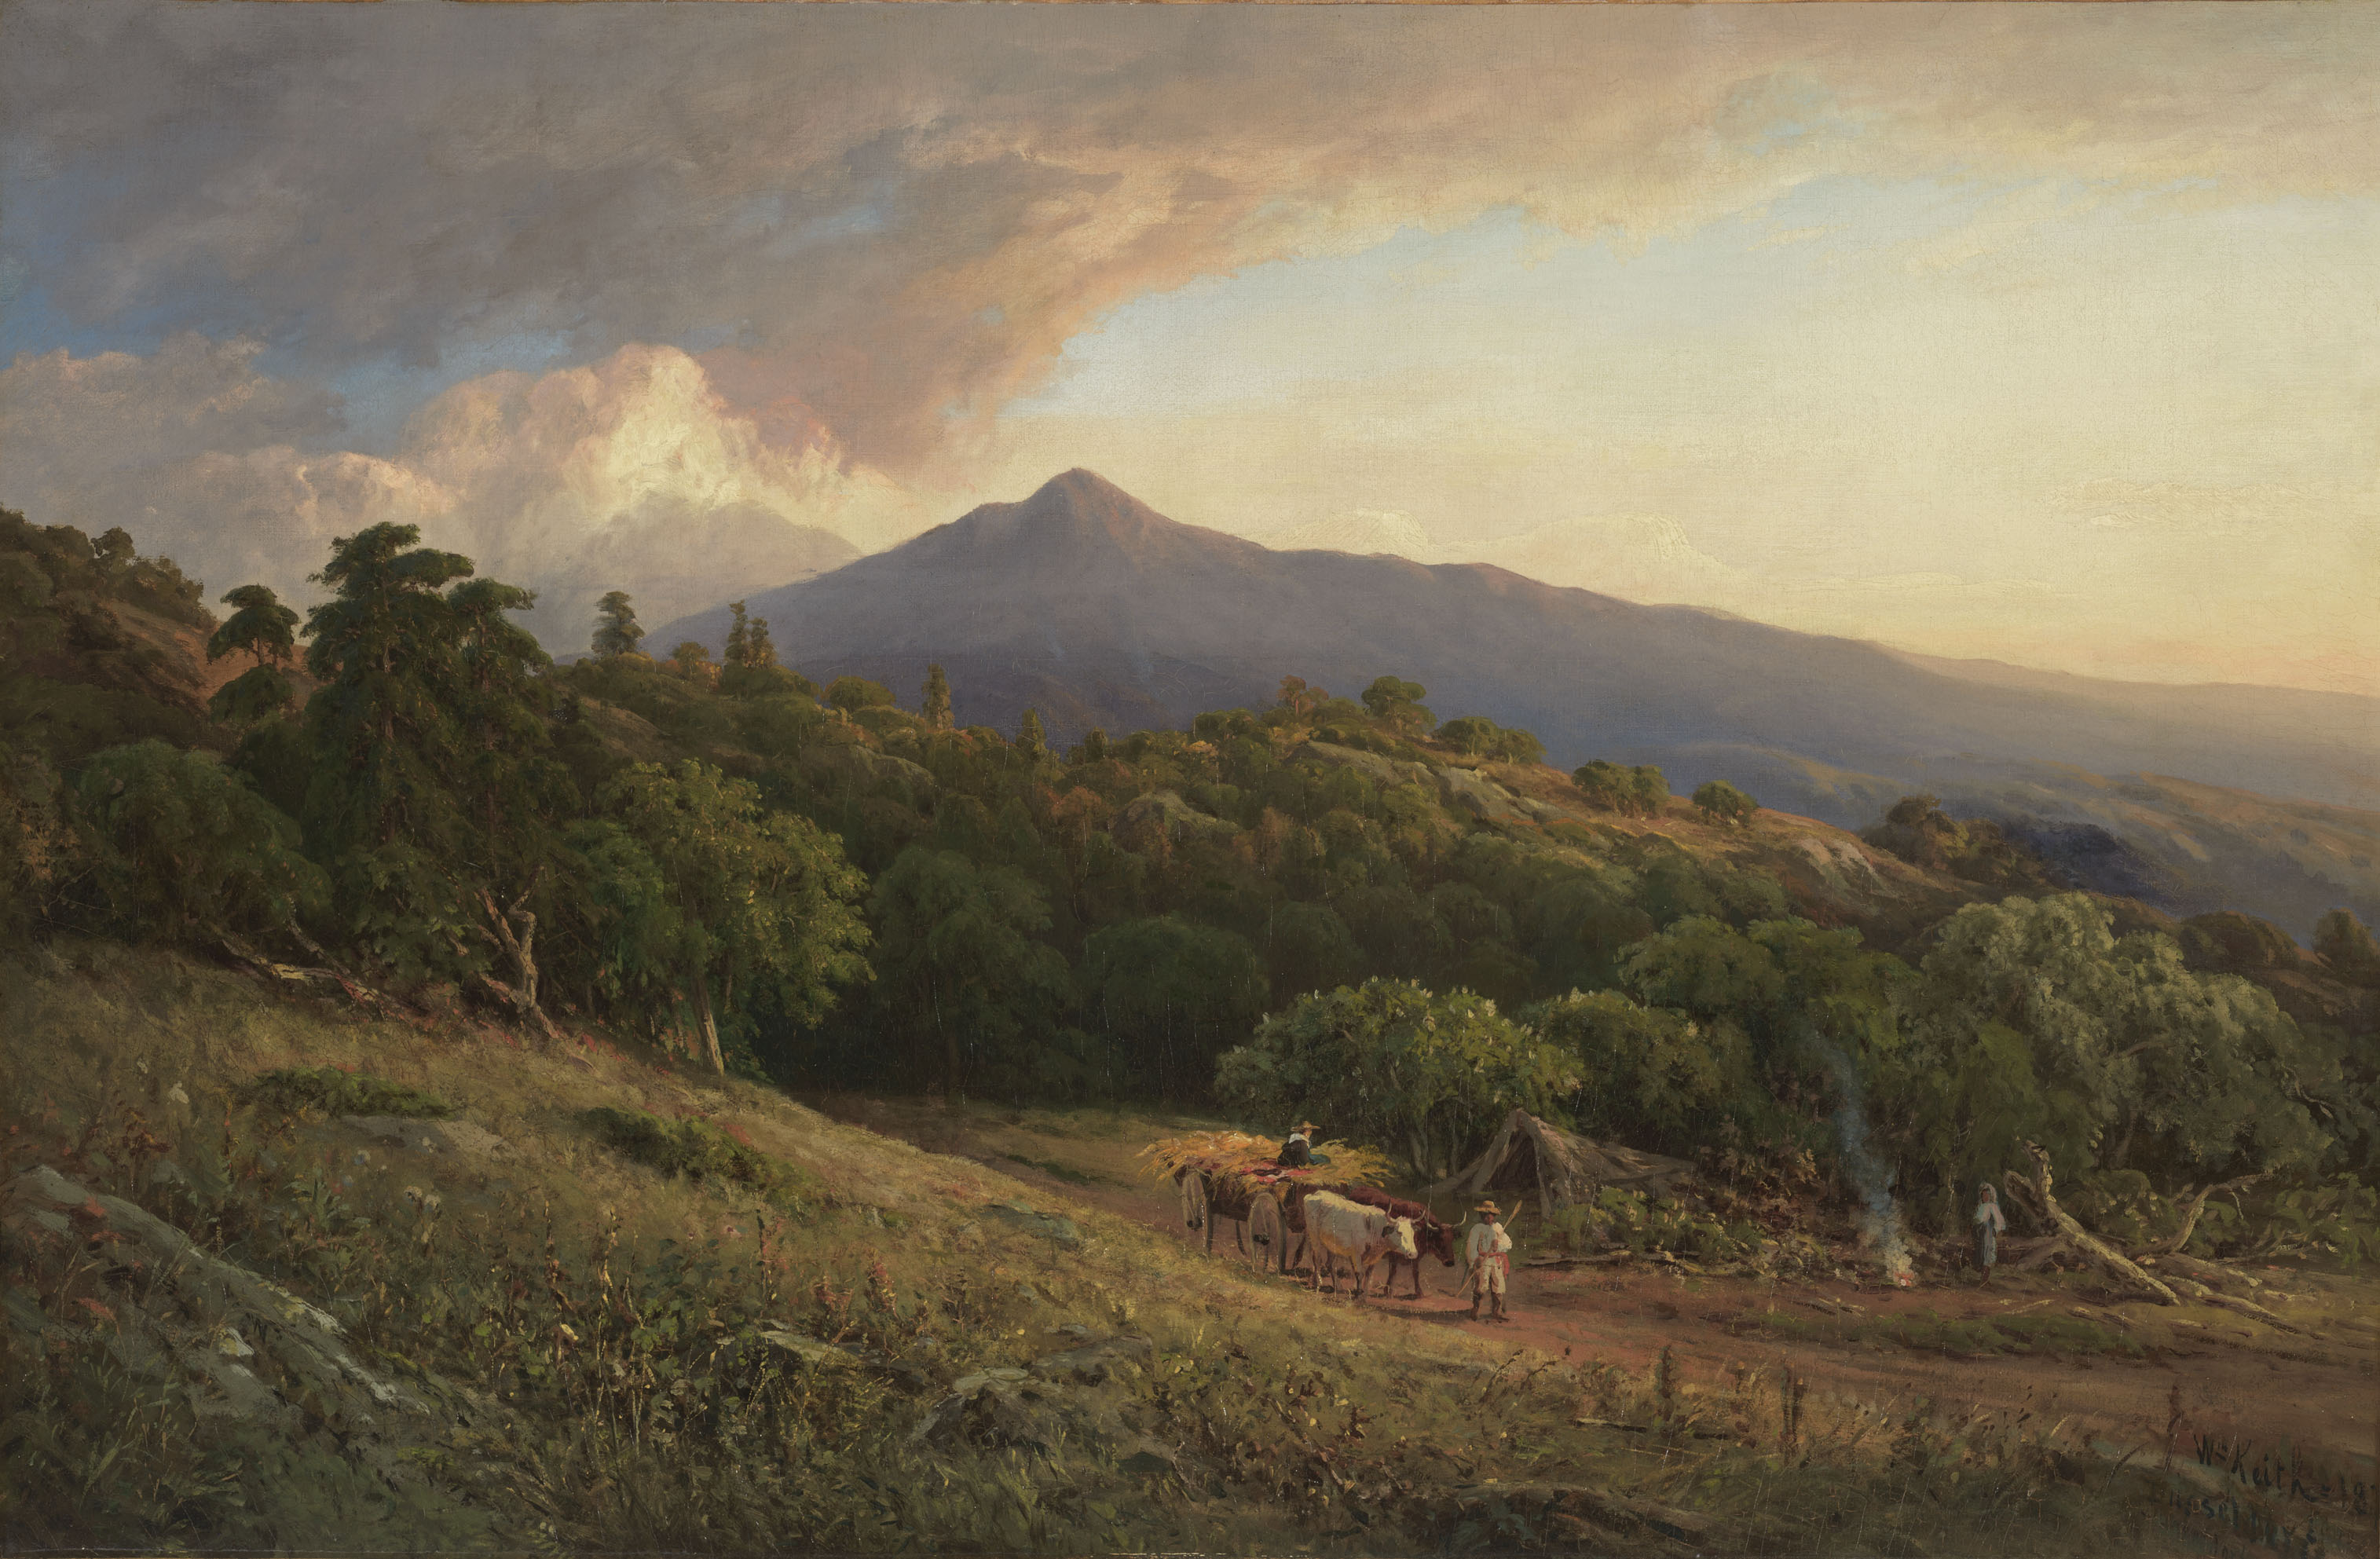 A Broadside of Mount Tamalpais by William Keith